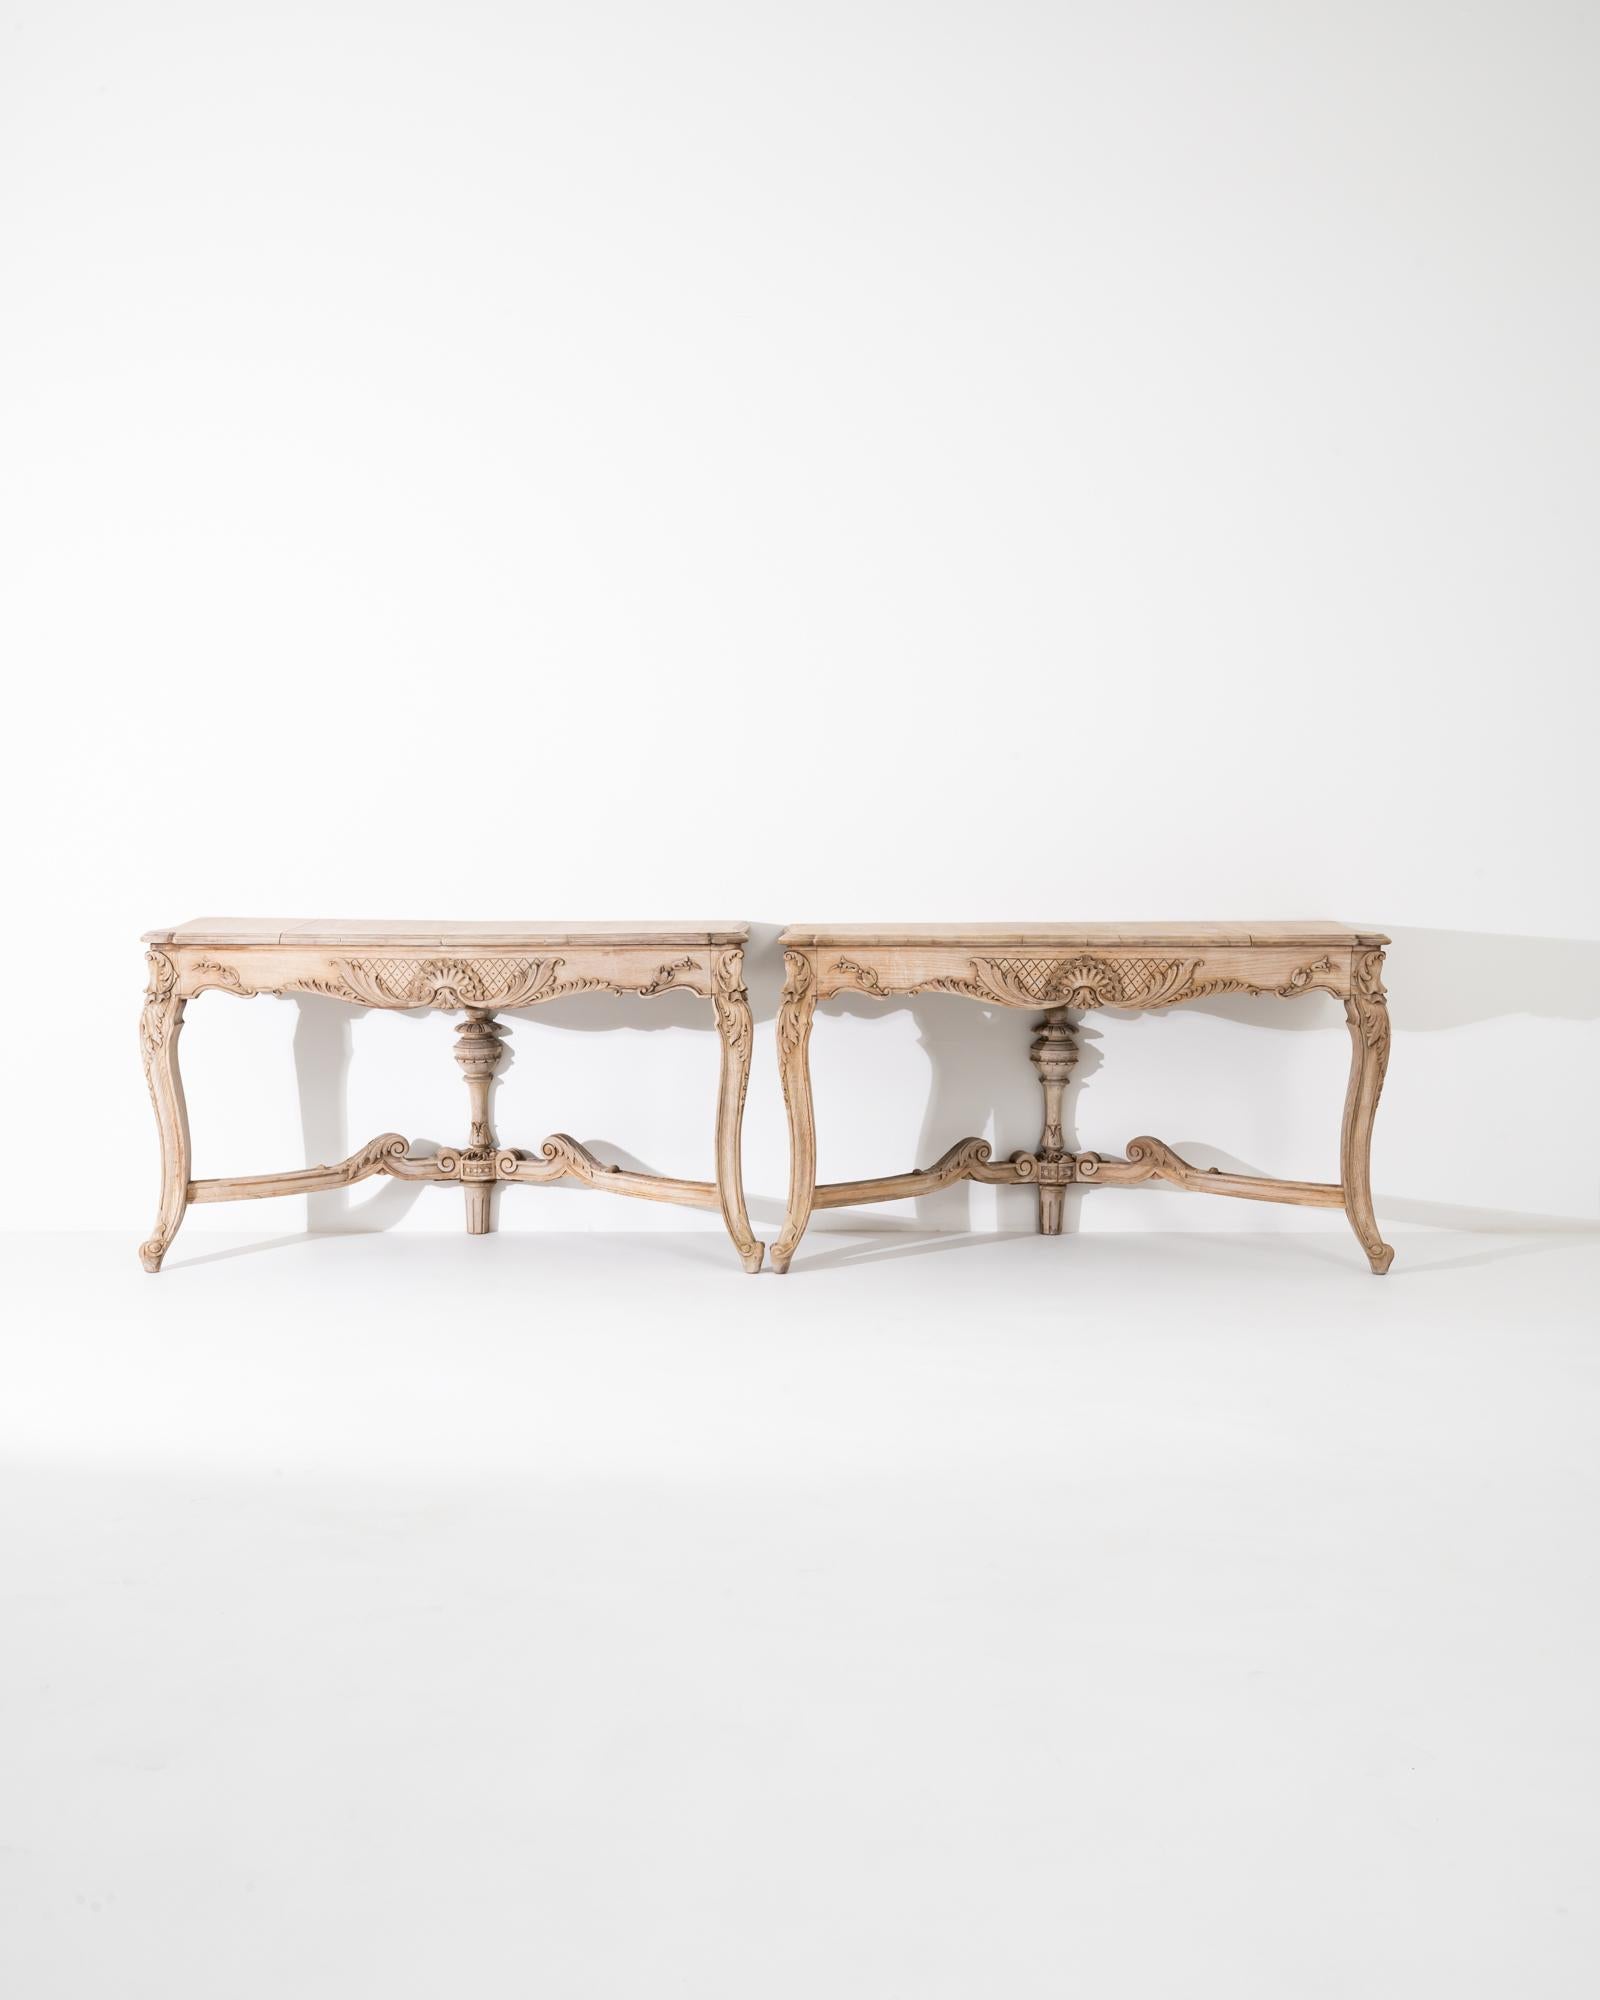 This pair of vintage console tables offer an elaborate Baroque design in natural oak. Made in France at the turn of the century, the design takes inspiration from the furniture of the royal courts of previous centuries, intended to dazzle spectators